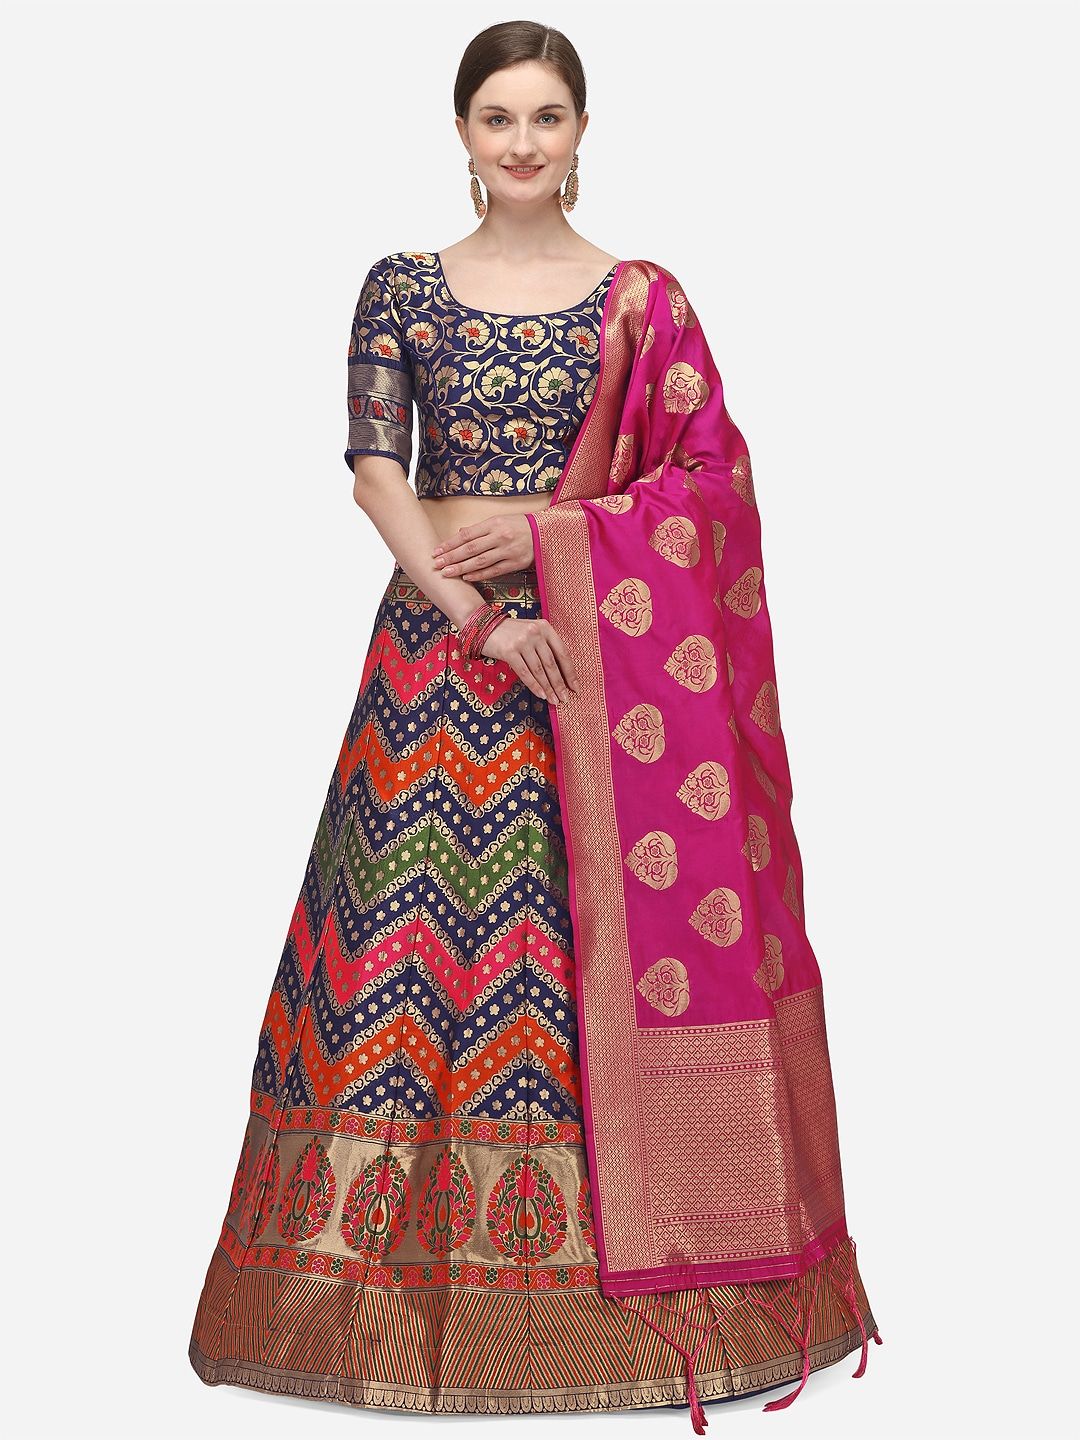 JATRIQQ Pink & Navy Blue Woven Design Semi-Stitched Lehenga & Unstitched Blouse with Dupatta Price in India